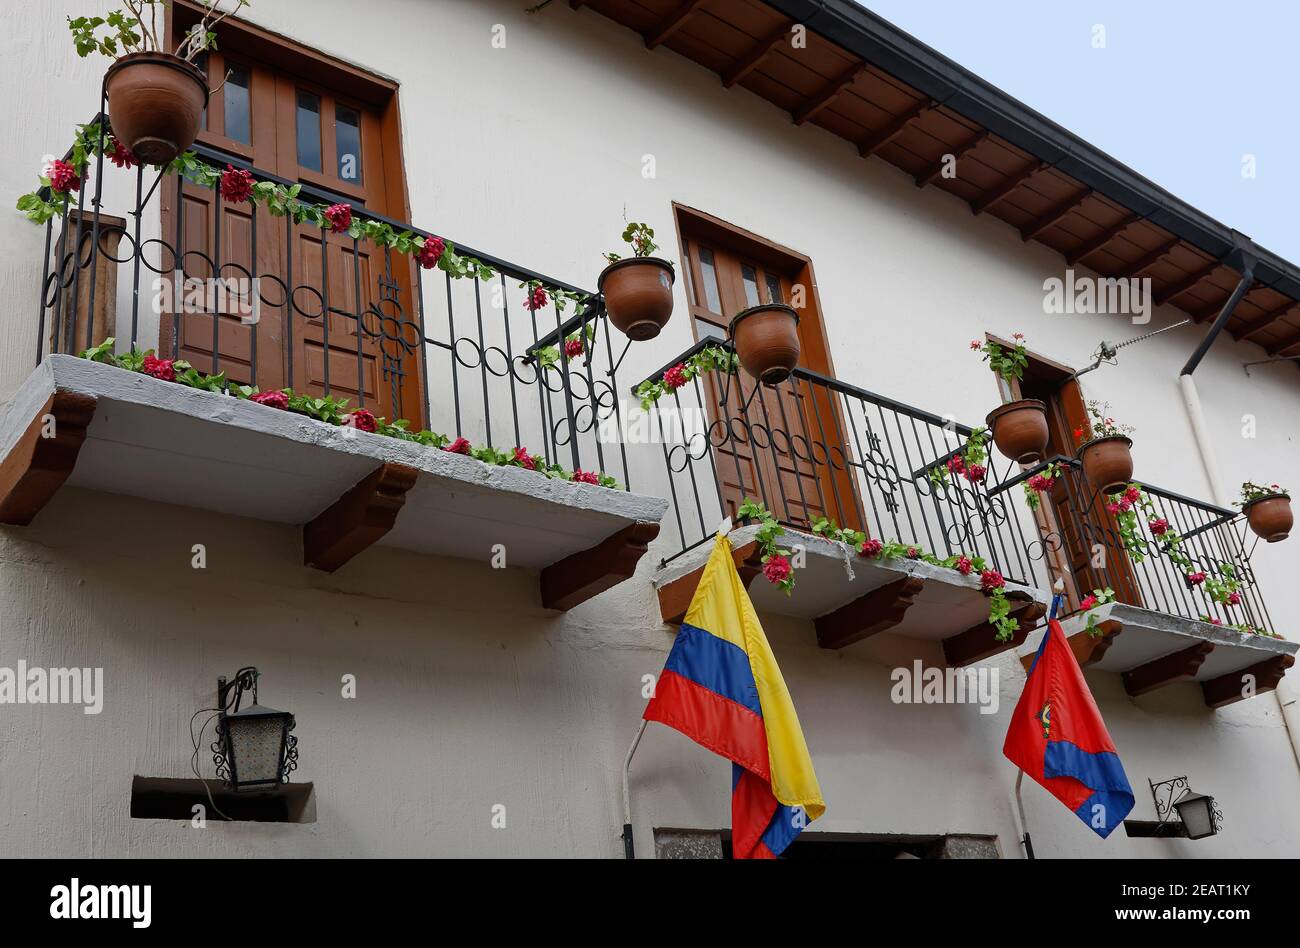 3 balconies, old white building, 2 flags, doors, flower garlands, pots on railings, wrought iron light fixtures, South America, Ronda District, Quito, Stock Photo